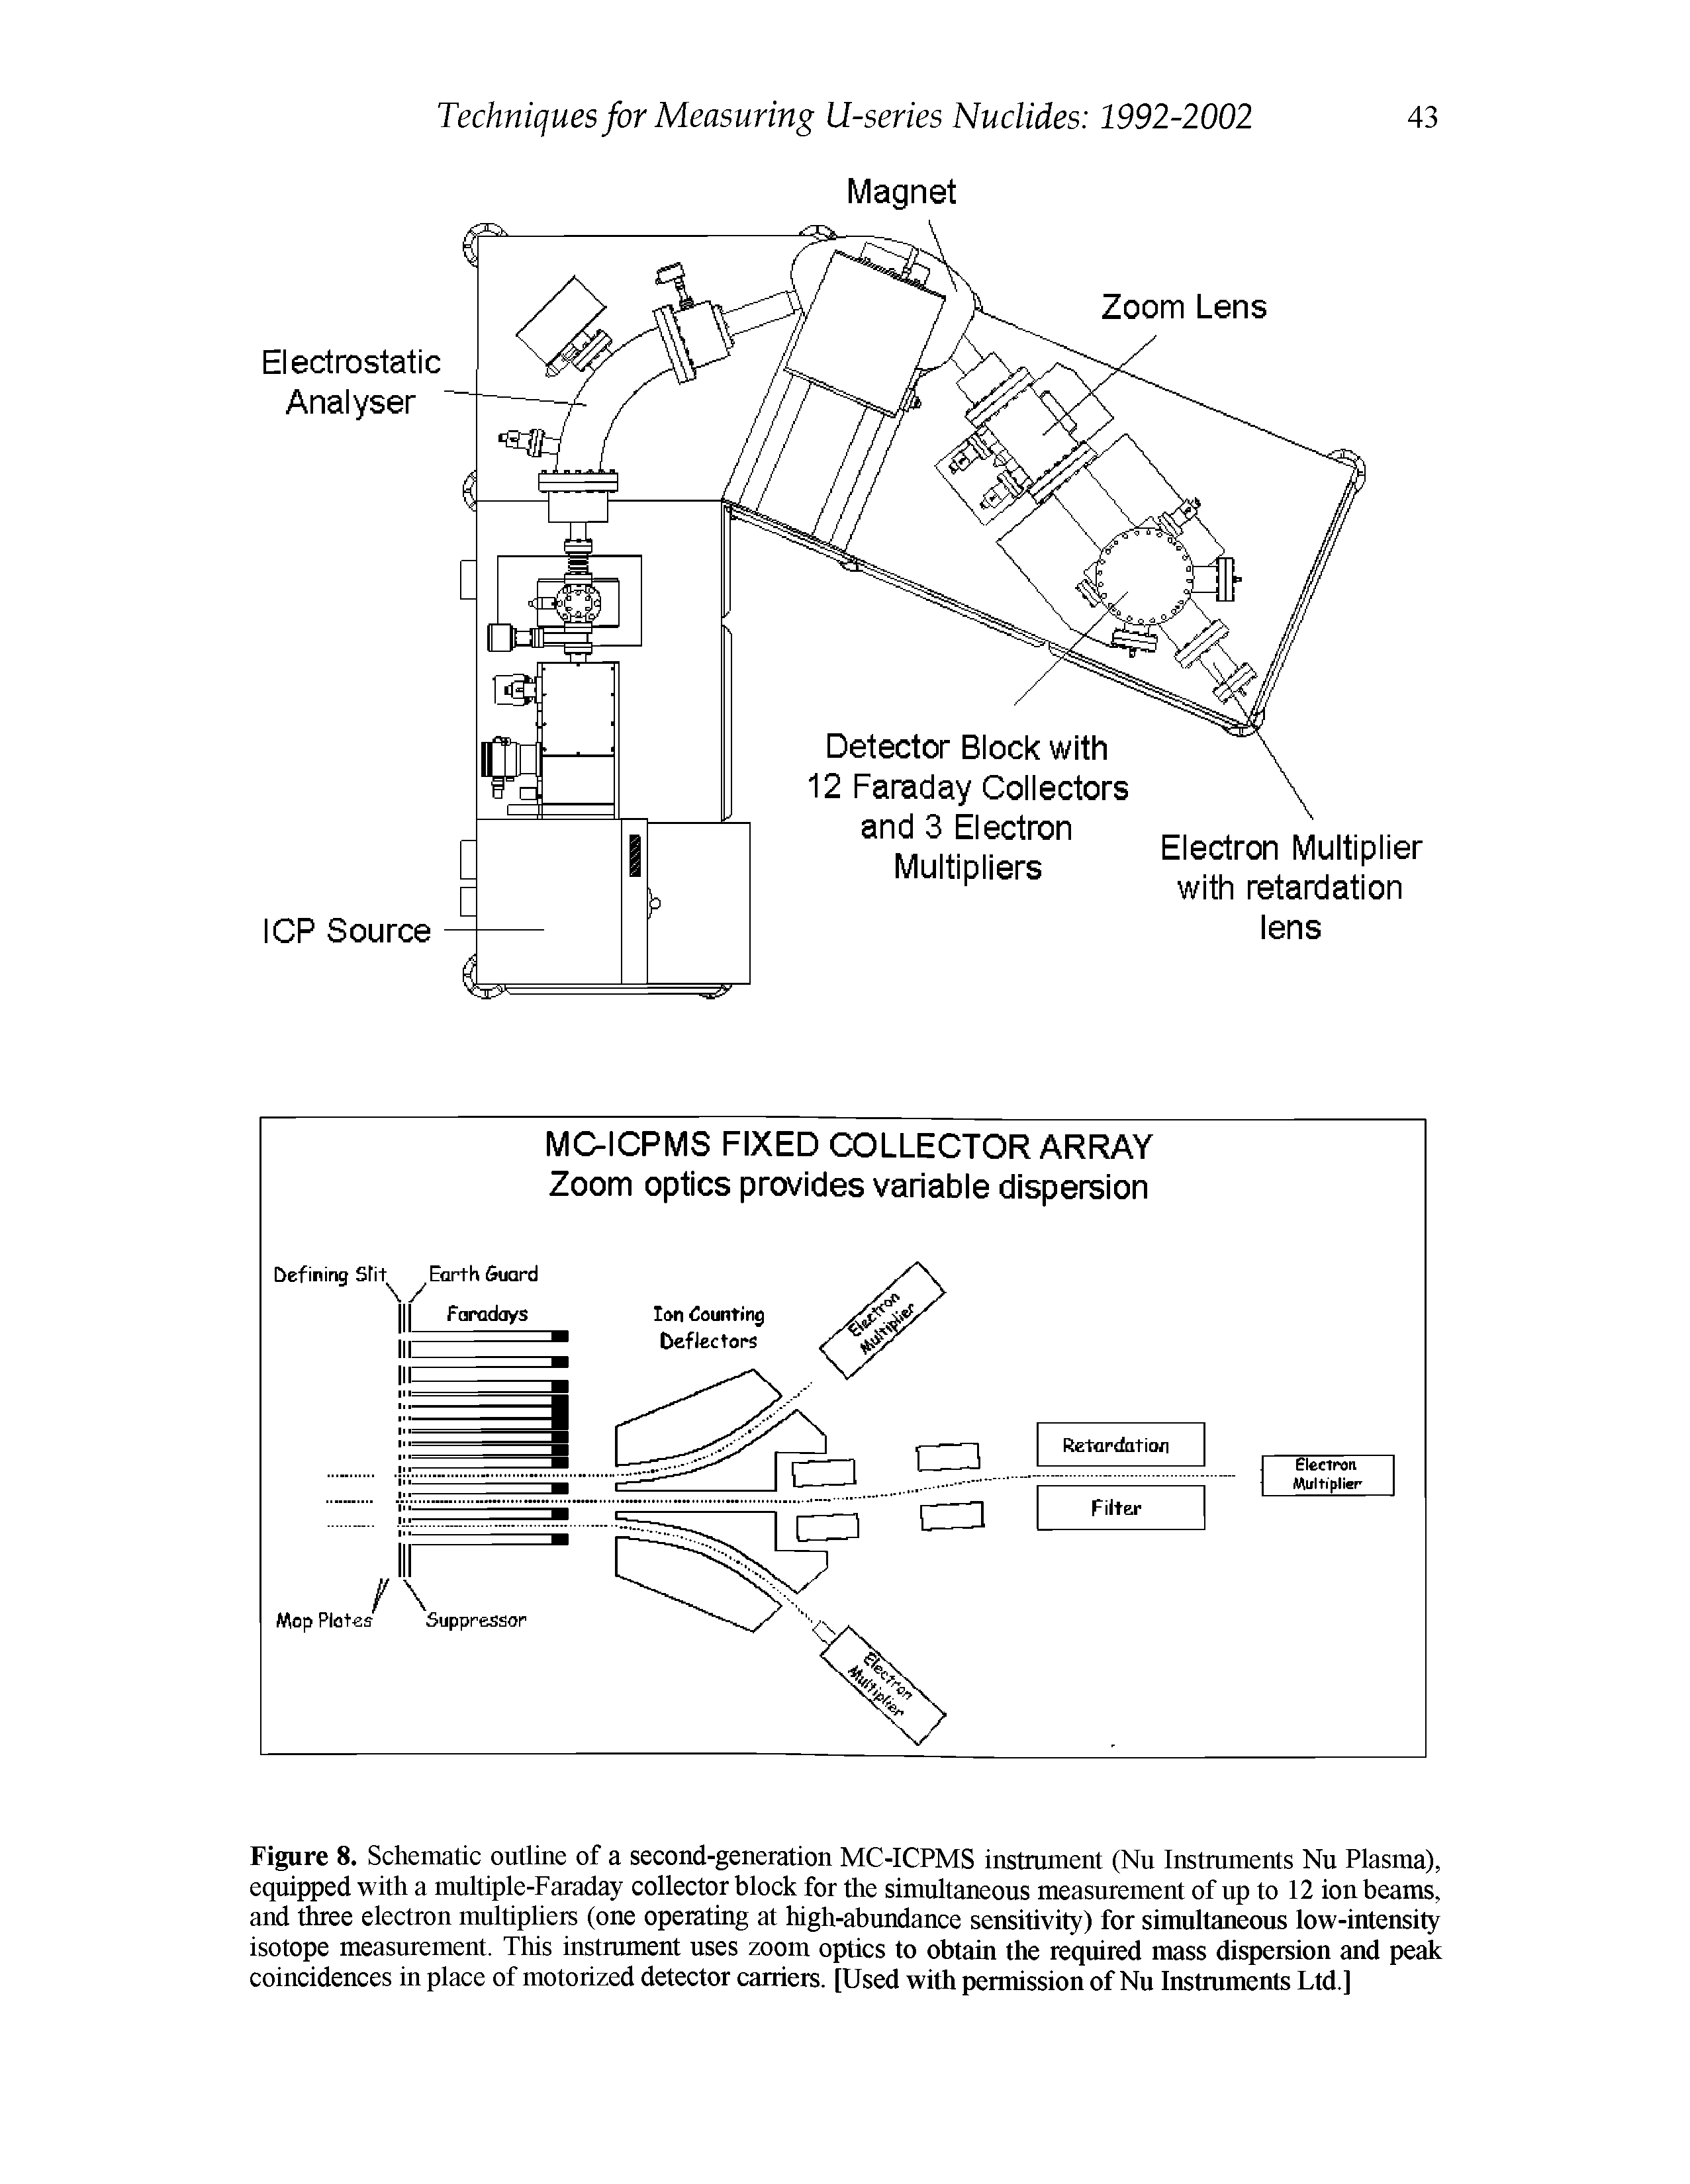 Figure 8. Schematic outline of a second-generation MC-ICPMS instrument (Nu Instalments Nu Plasma), equipped with a multiple-Faraday collector block for the simultaneous measurement of up to 12 ion beams, and three electron multipliers (one operating at high-abundance sensitivity) for simultaneous low-intensity isotope measurement. This instmment uses zoom optics to obtain the required mass dispersion and peak coincidences in place of motorized detector carriers. [Used with permission of Nu Instruments Ltd.]...